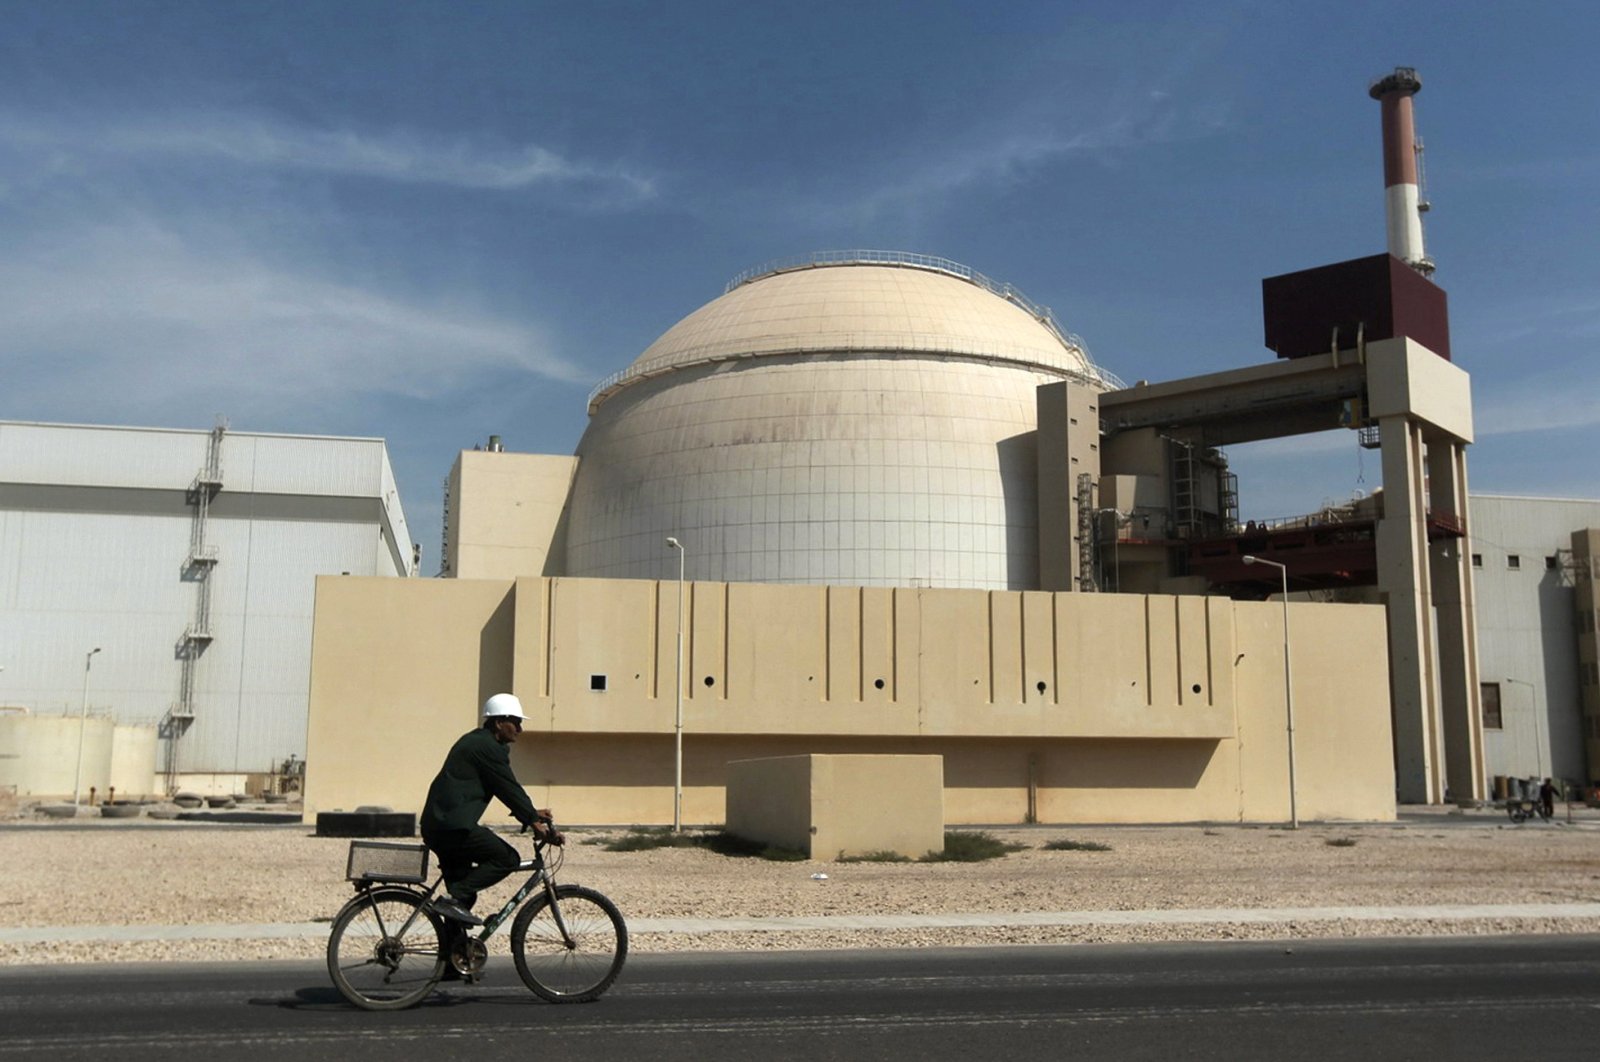 A worker rides a bicycle in front of the nuclear reactor at the Bushehr nuclear power plant, Iran, Oct. 26, 2010. (AP Photo)